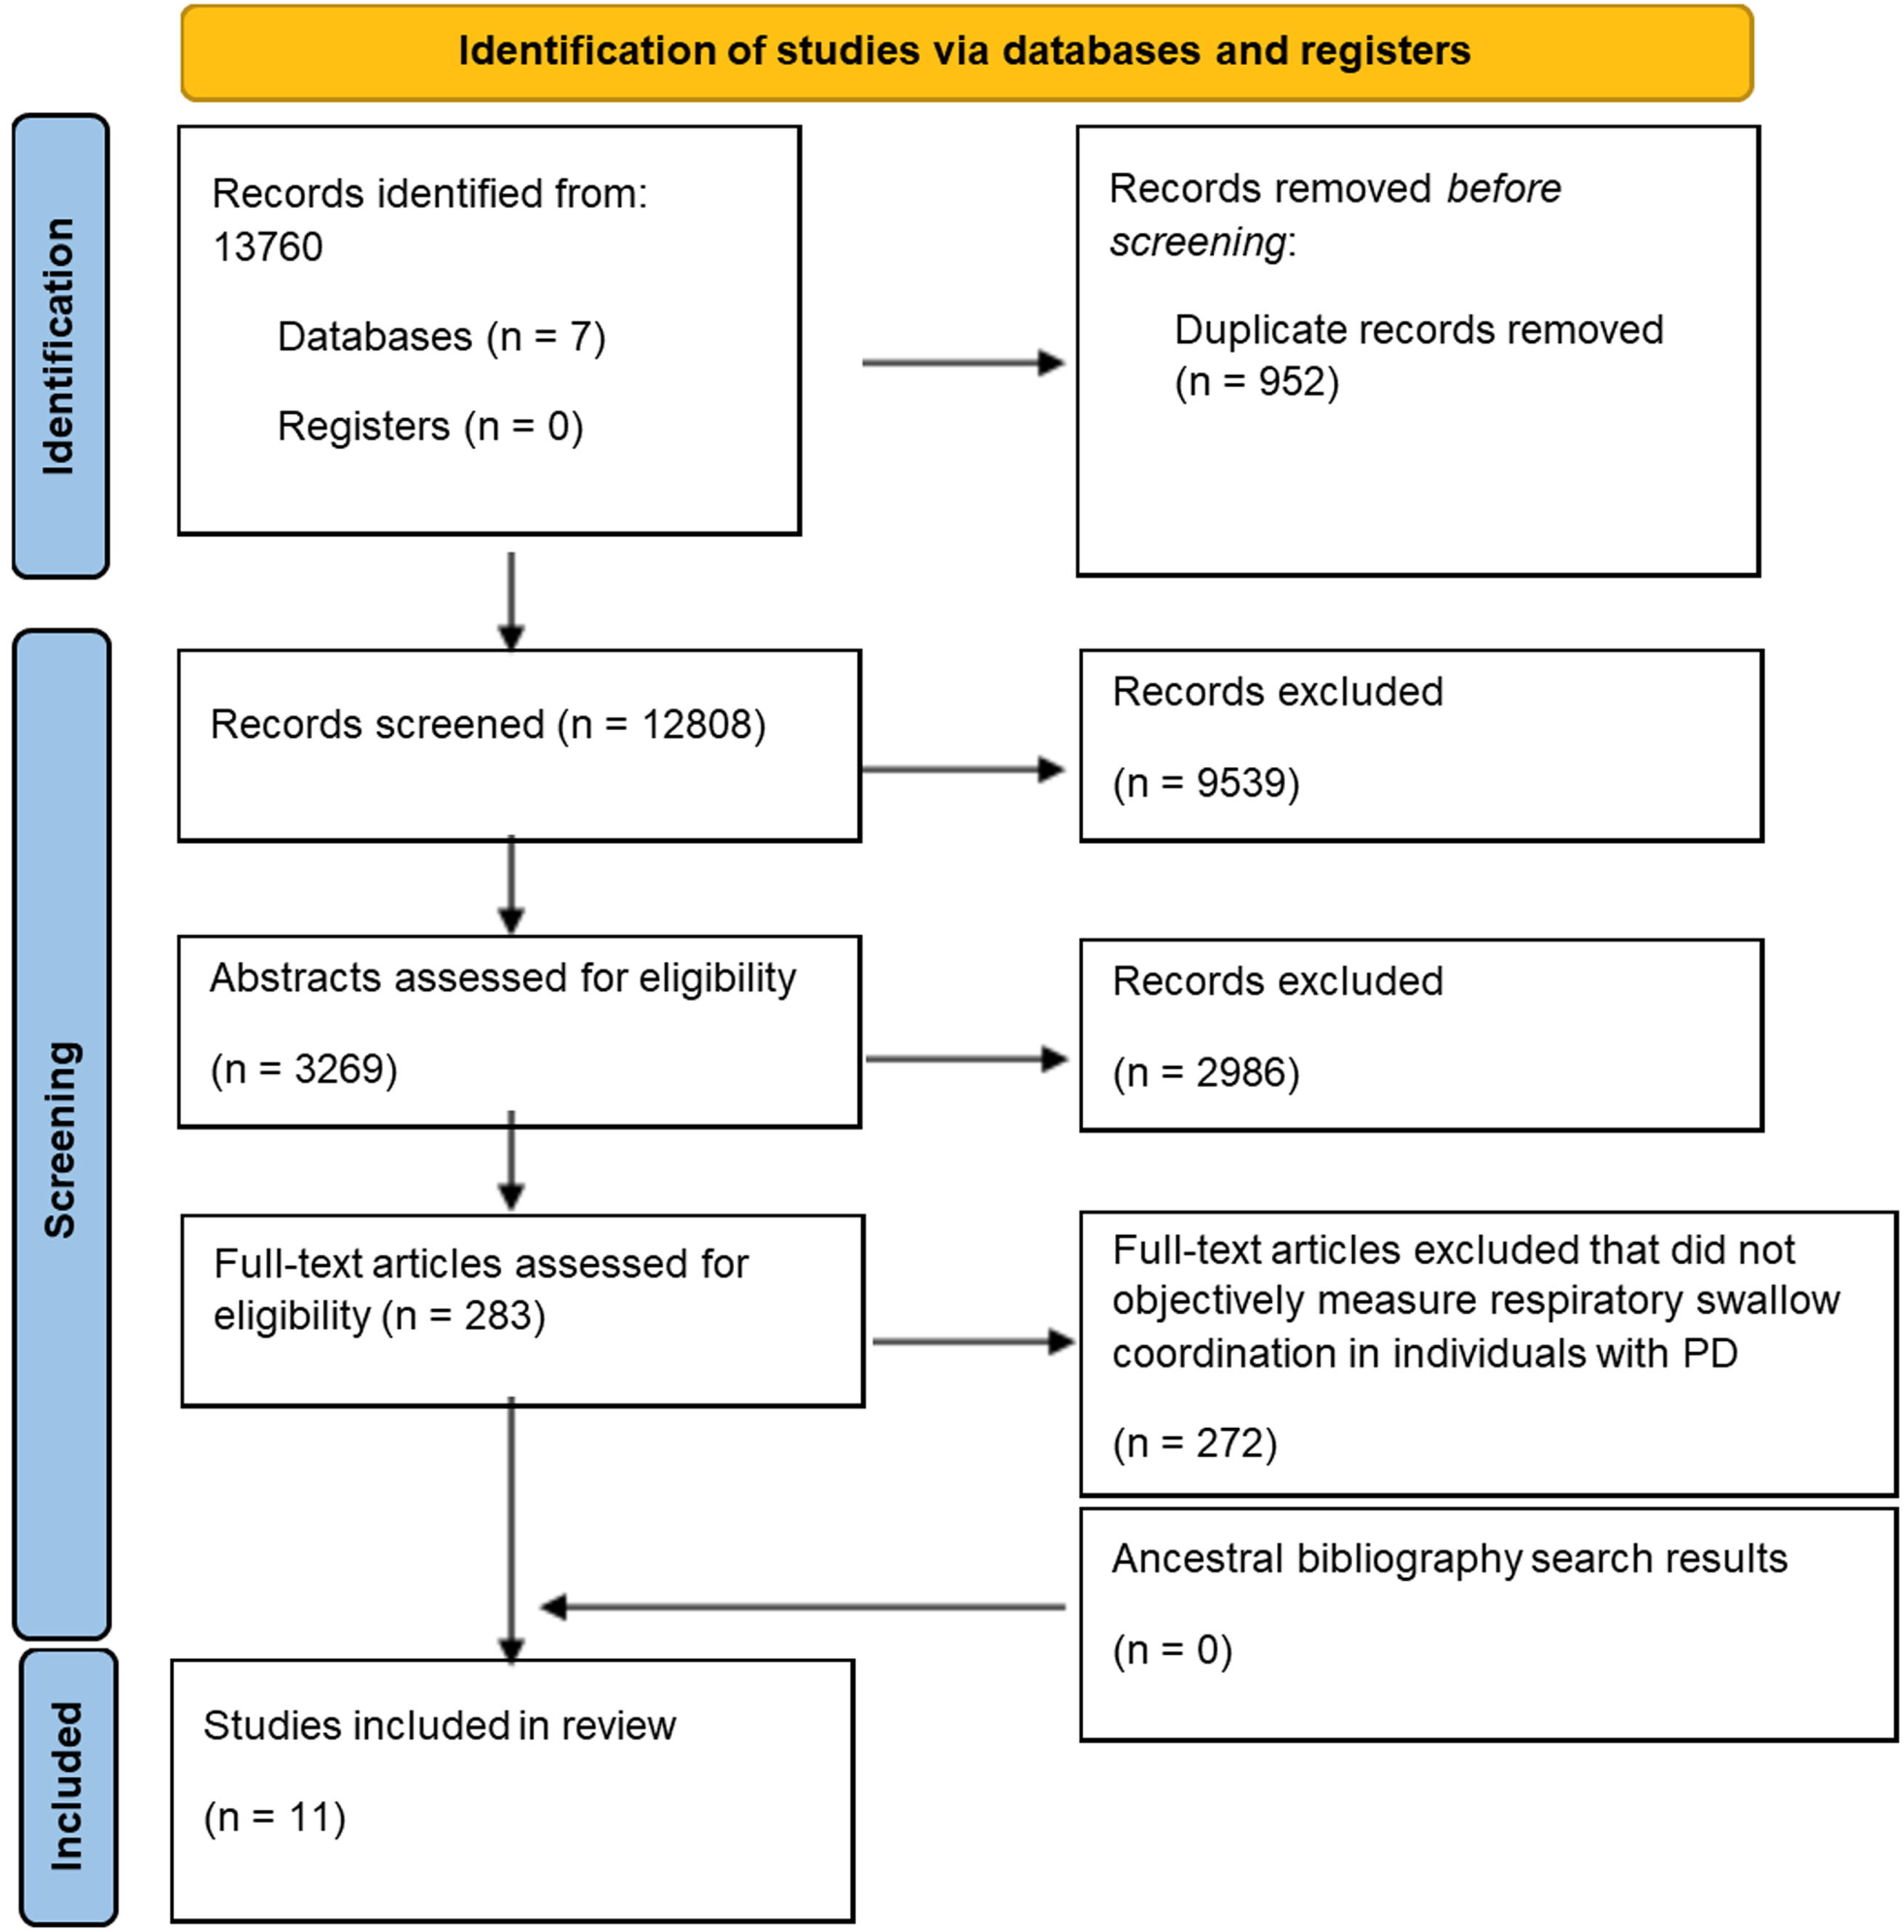 The figure showcases the screening process using Preferred Reporting Items for Systematic Reviews and Meta-Analysis (PRISMA) for determining the eleven articles included in this systematic review.